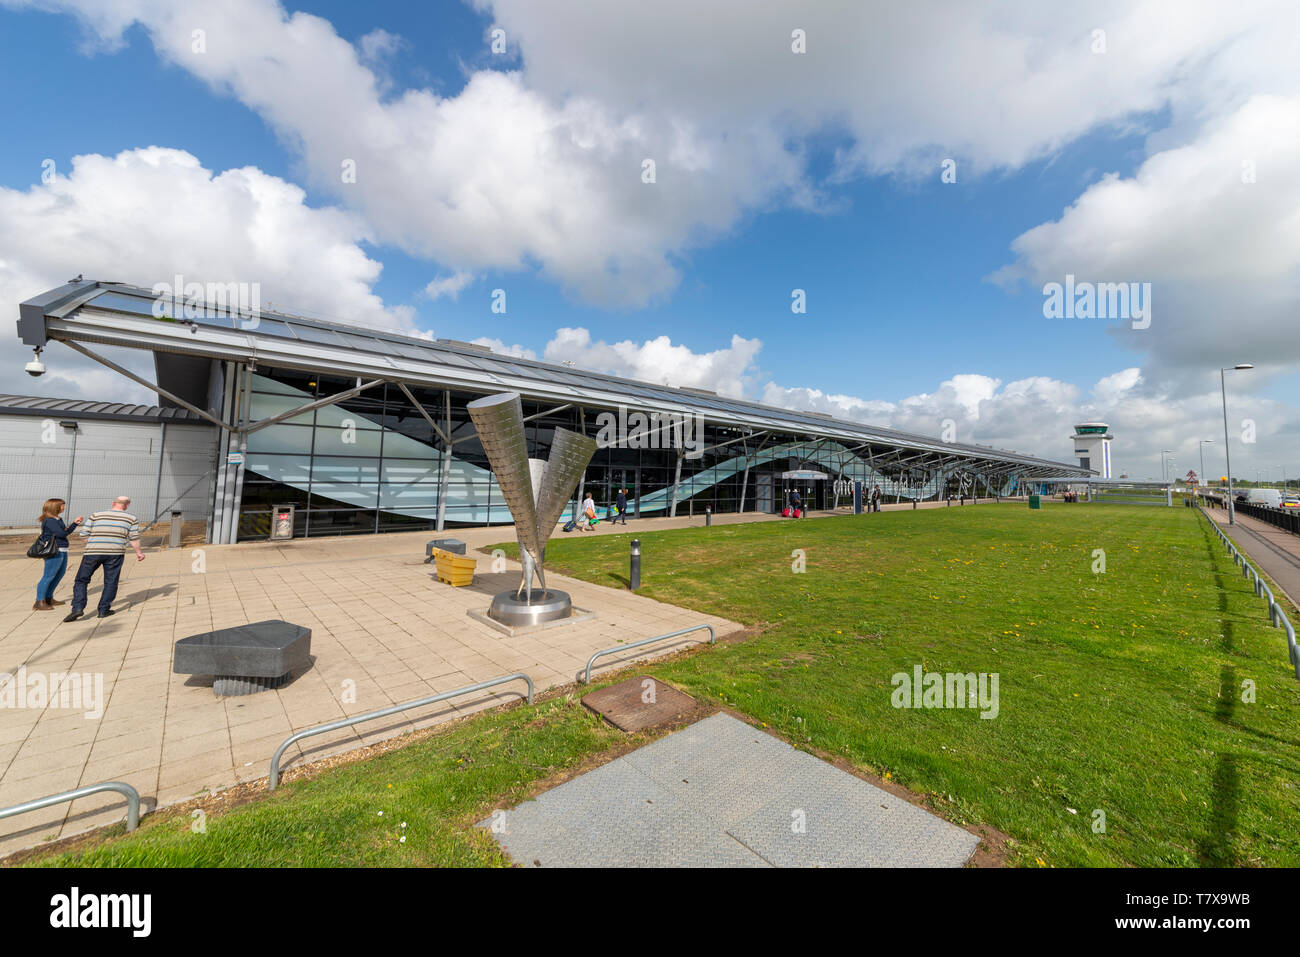 London Southend Airport terminal building, Southend on sea, Essex, UK. People, passengers and air traffic control tower. Memorial Stock Photo